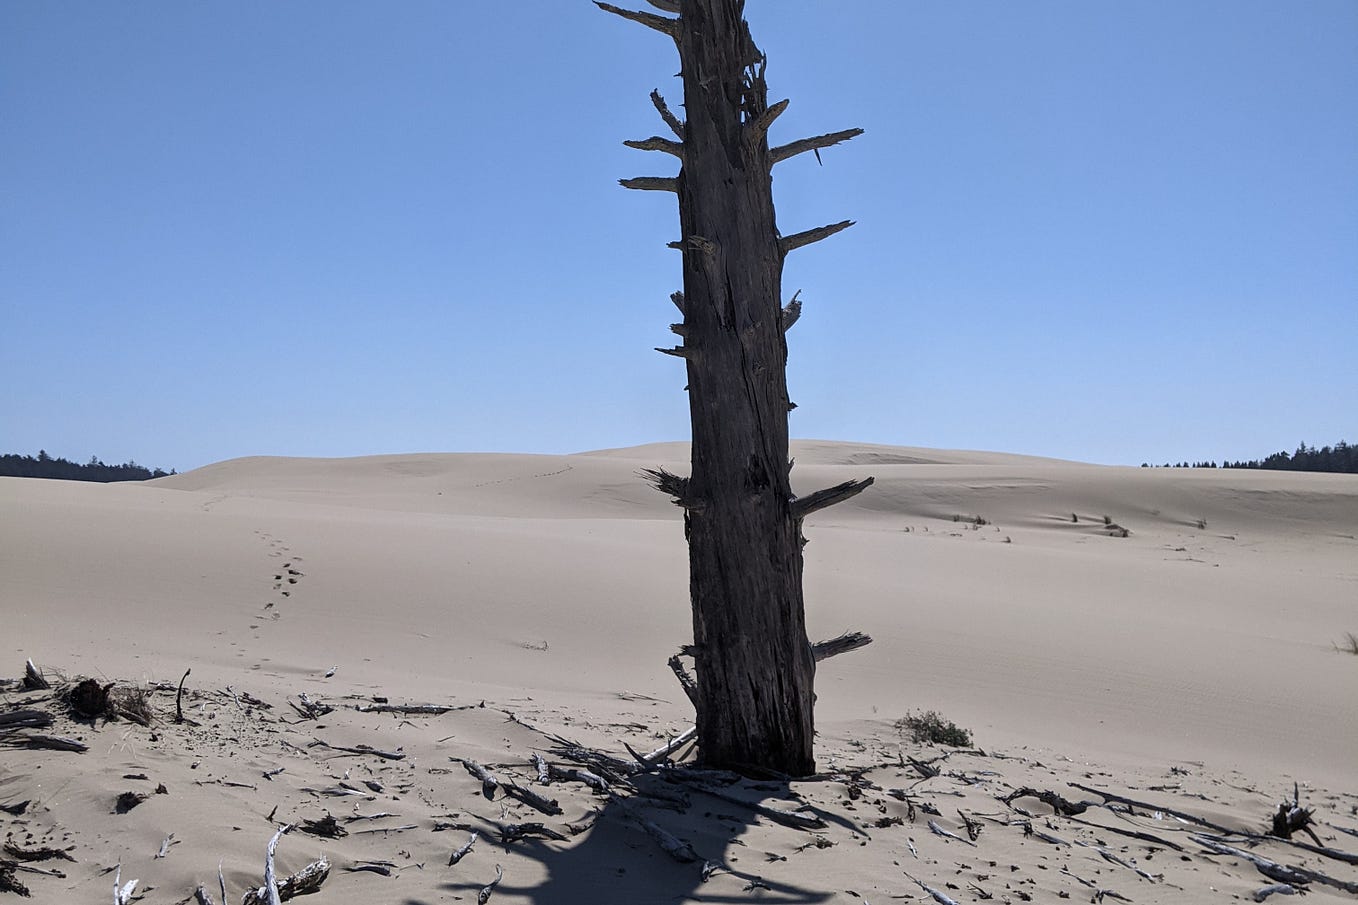 A dead tree in the middle of a desert. Its dead branches lie at its base. Nothing is alive